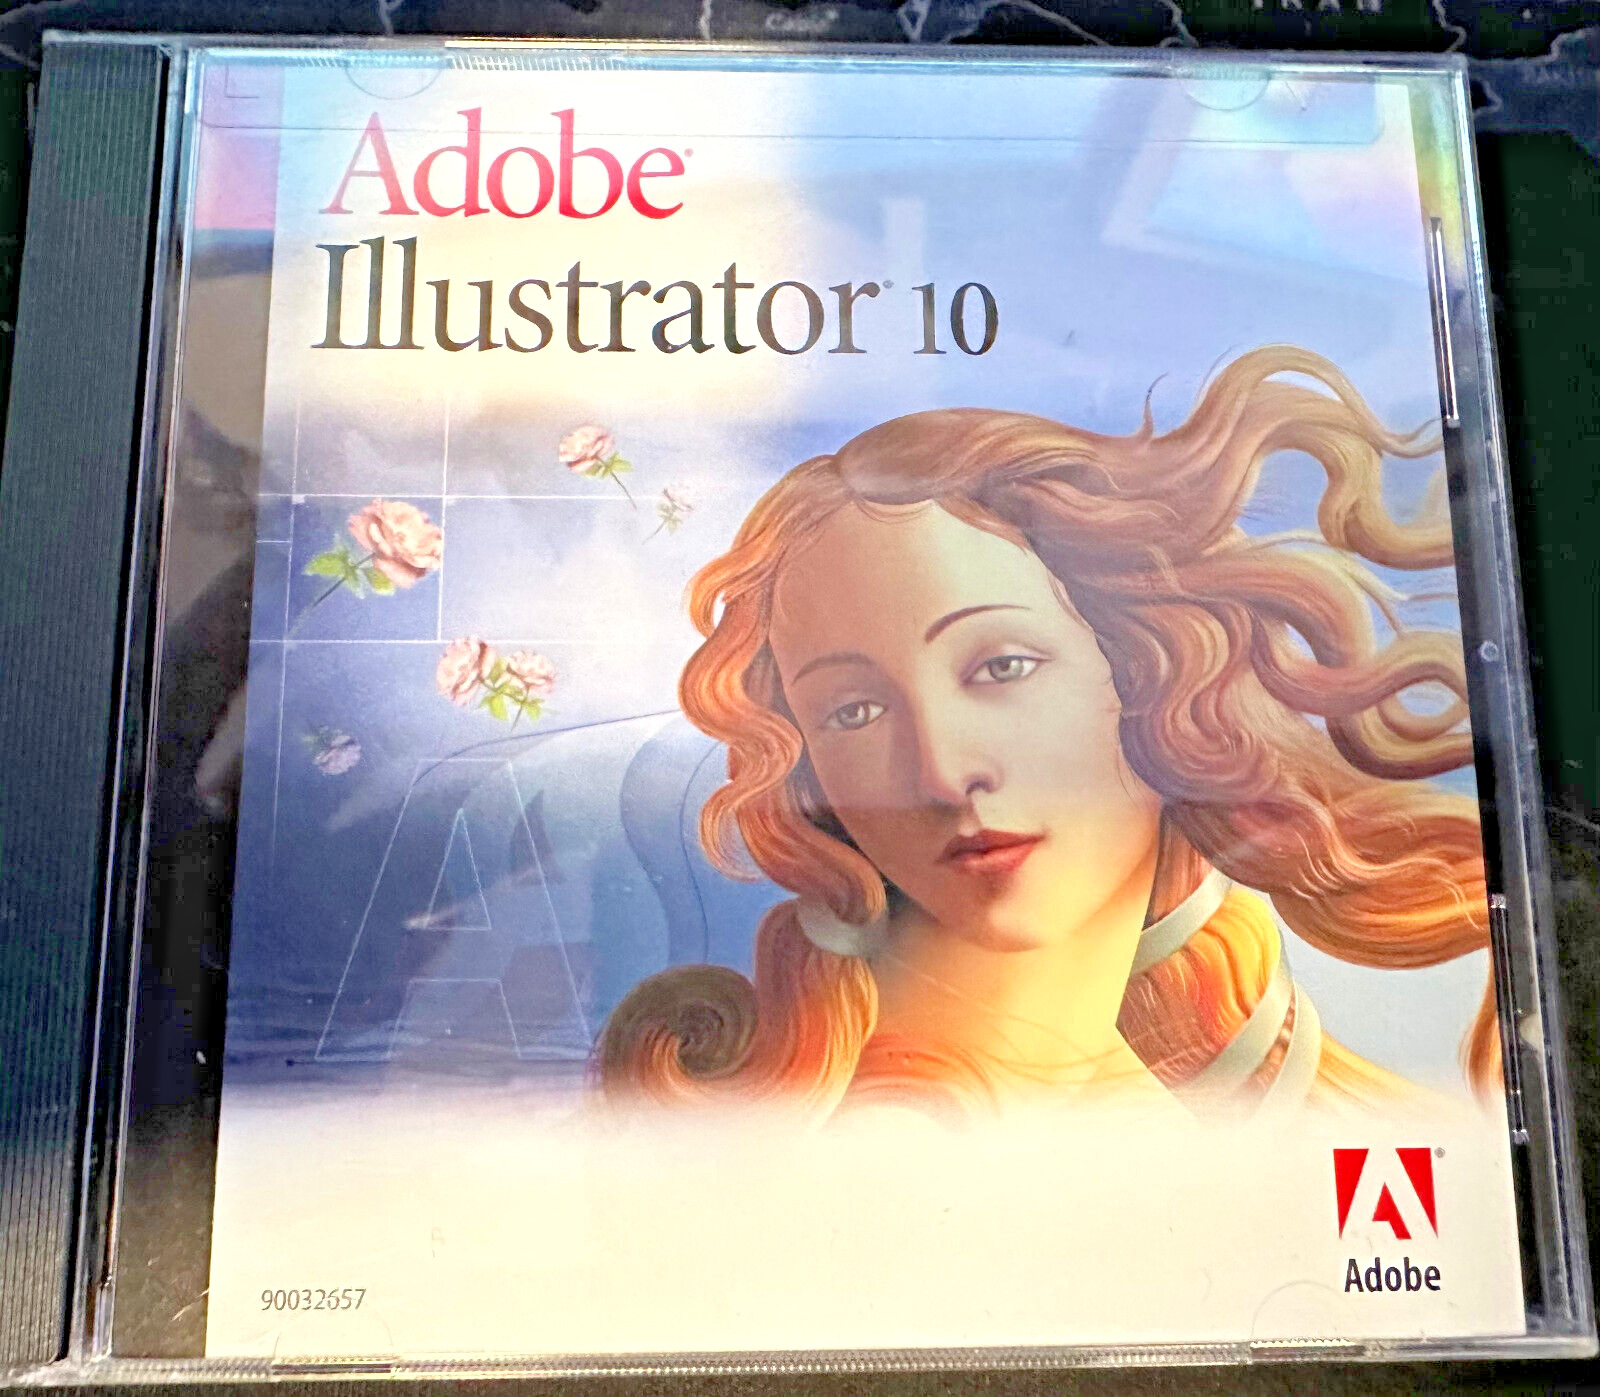 Adobe Illustrator 10 for Windows with Serial Number